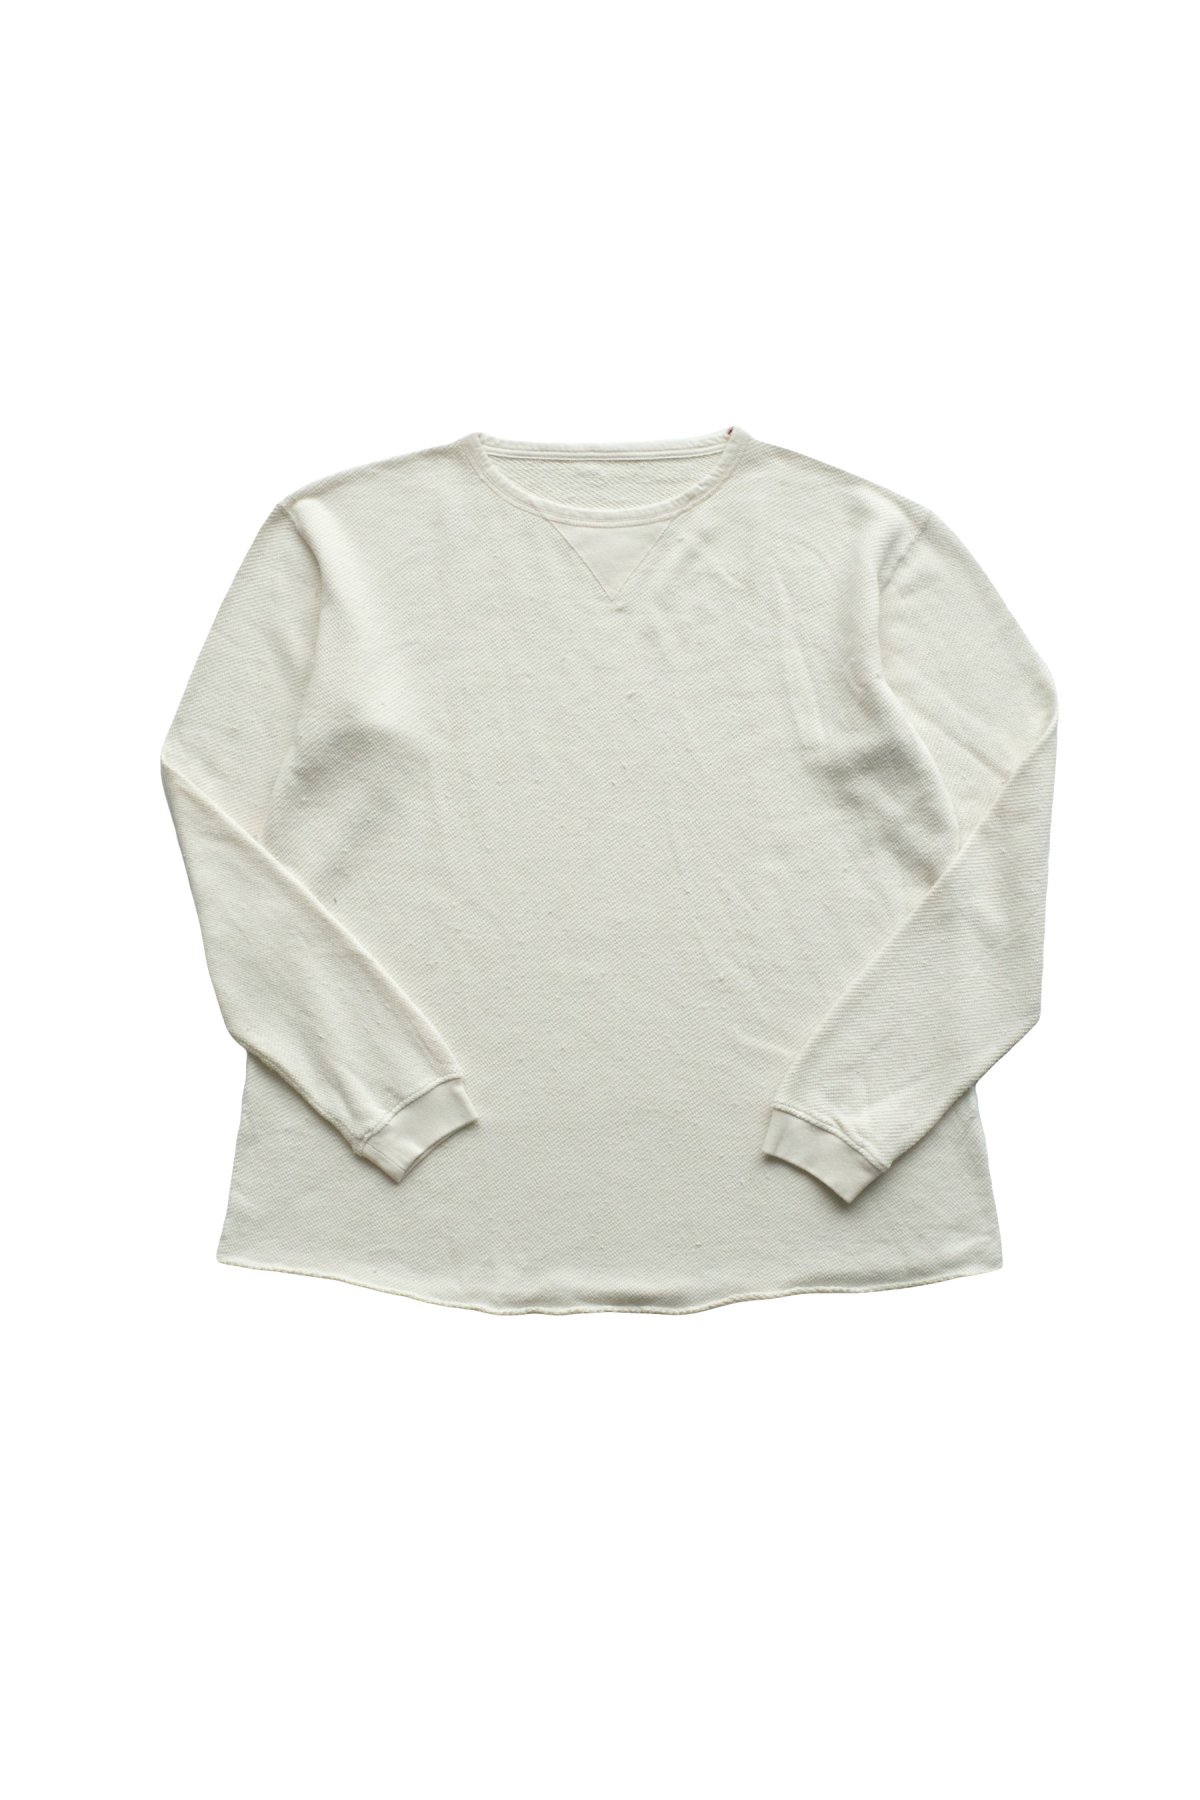 Porter Classic - FRENCH THERMAL CREWNECK - WHITE ポーター